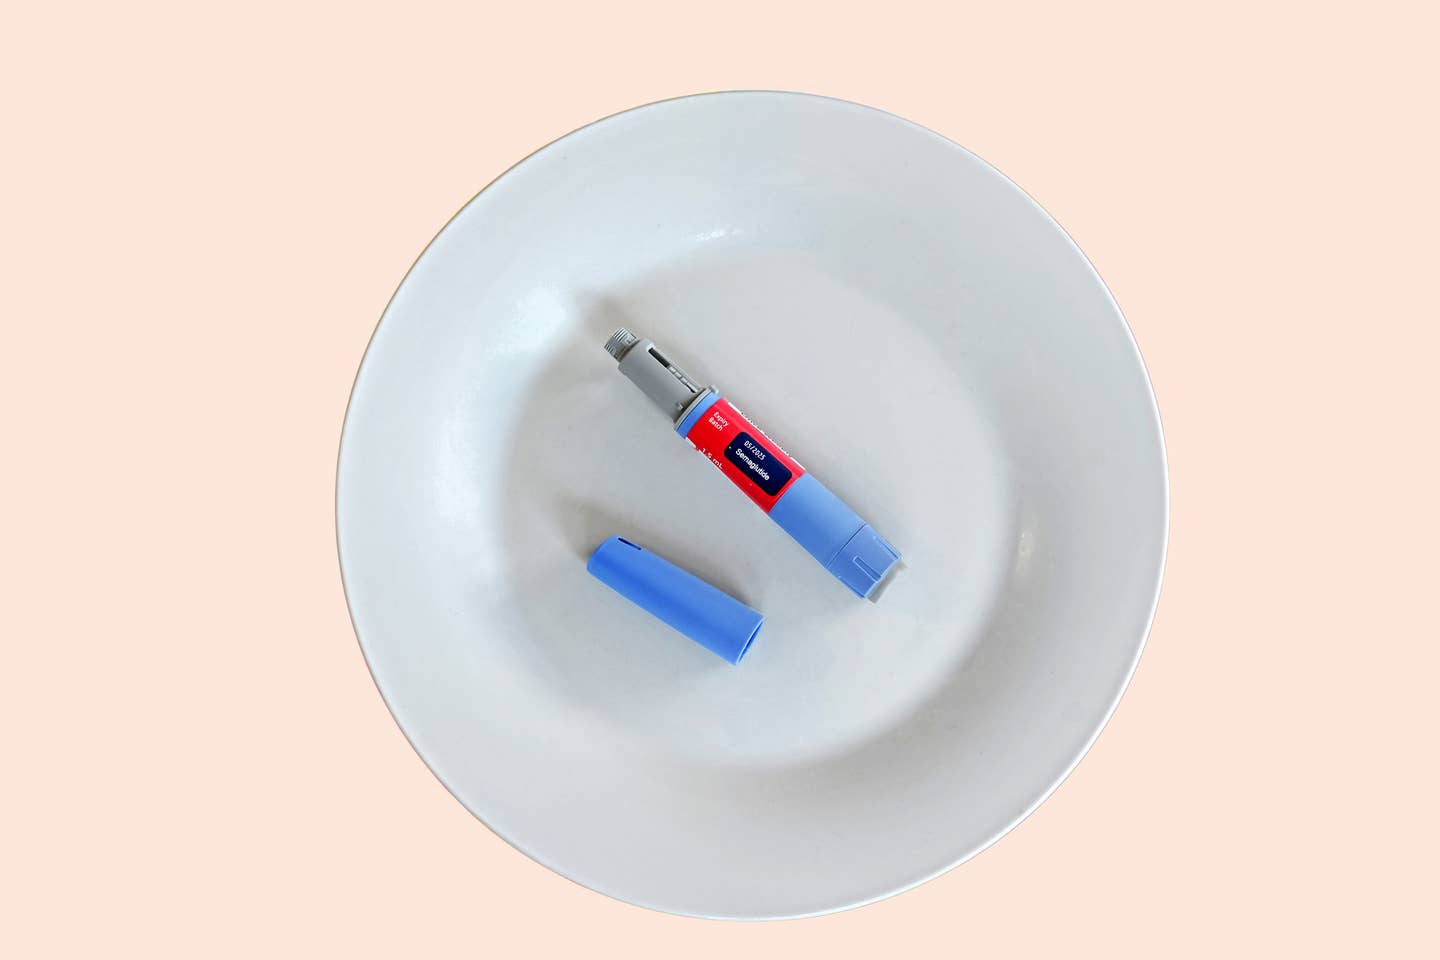 An injectable dose of semaglutide, the drug known as Ozempic and Wegovy, on a plain white plate